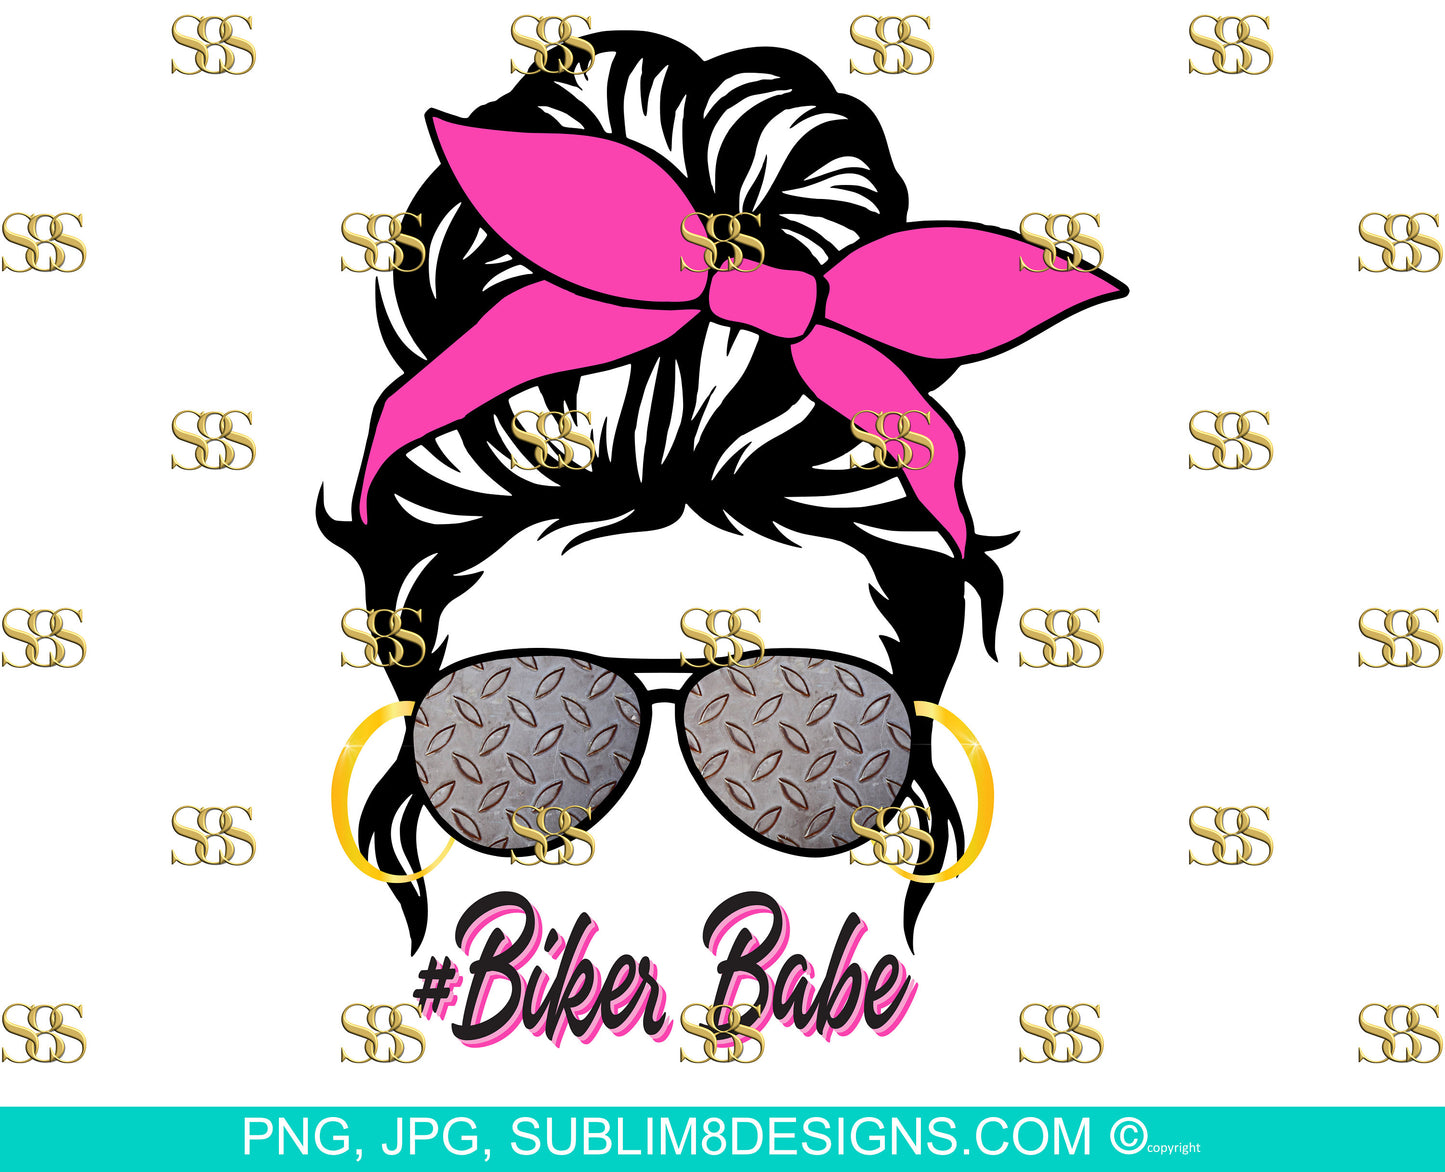 Pink Biker Babe Messy Bun Sublimation Design PNG and JPG ONLY